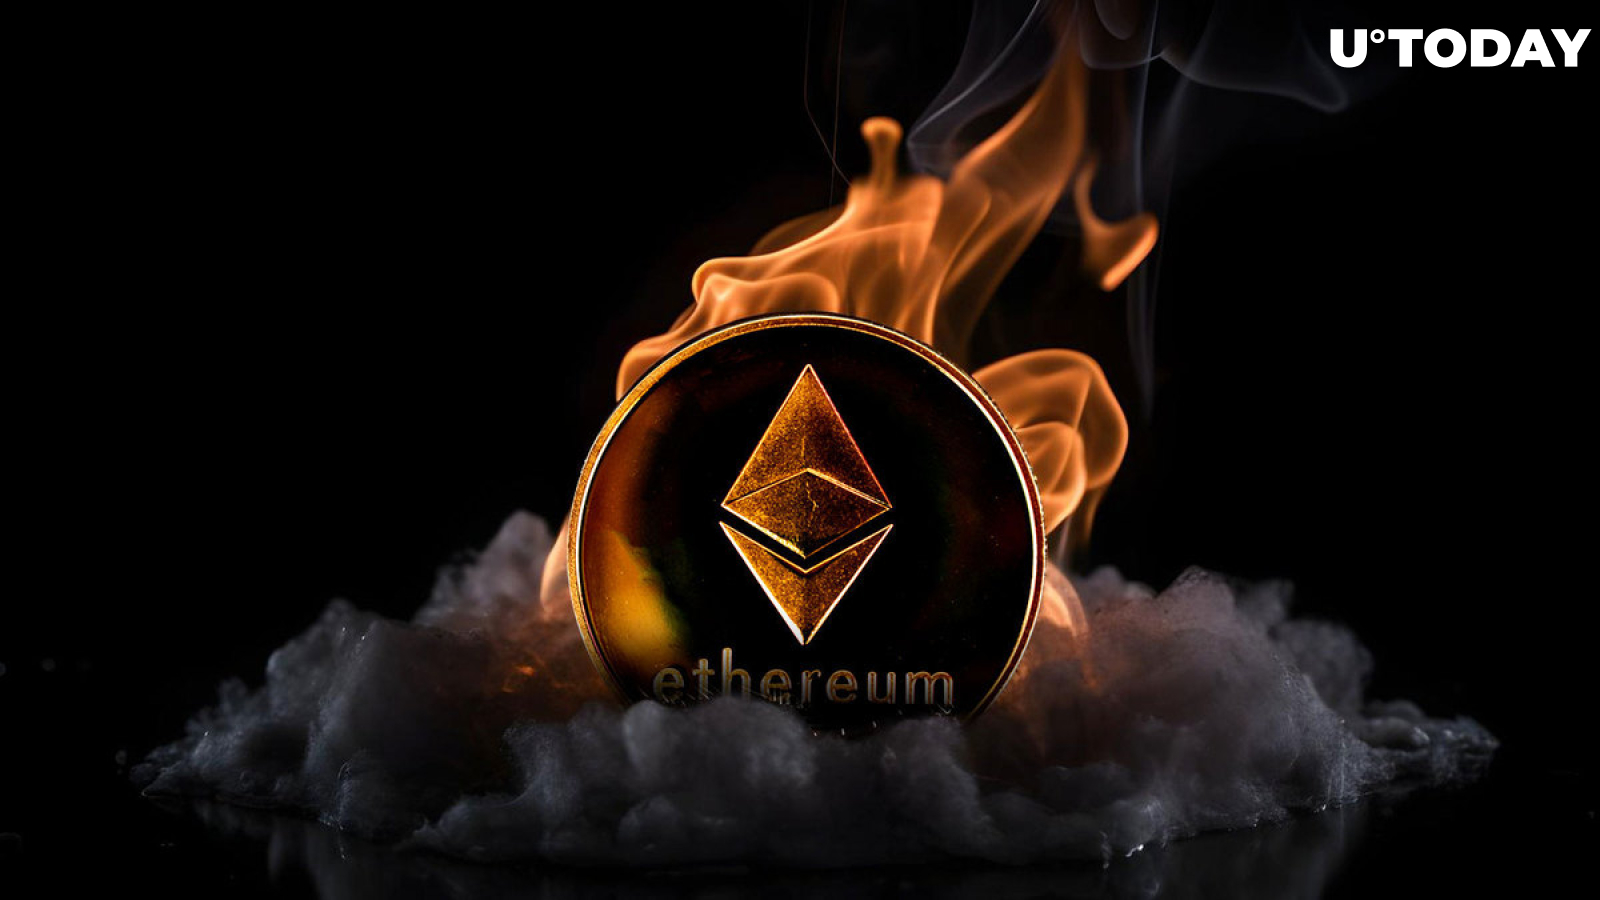 Here's Who Burned 9,001 ETH in Last 30 Days